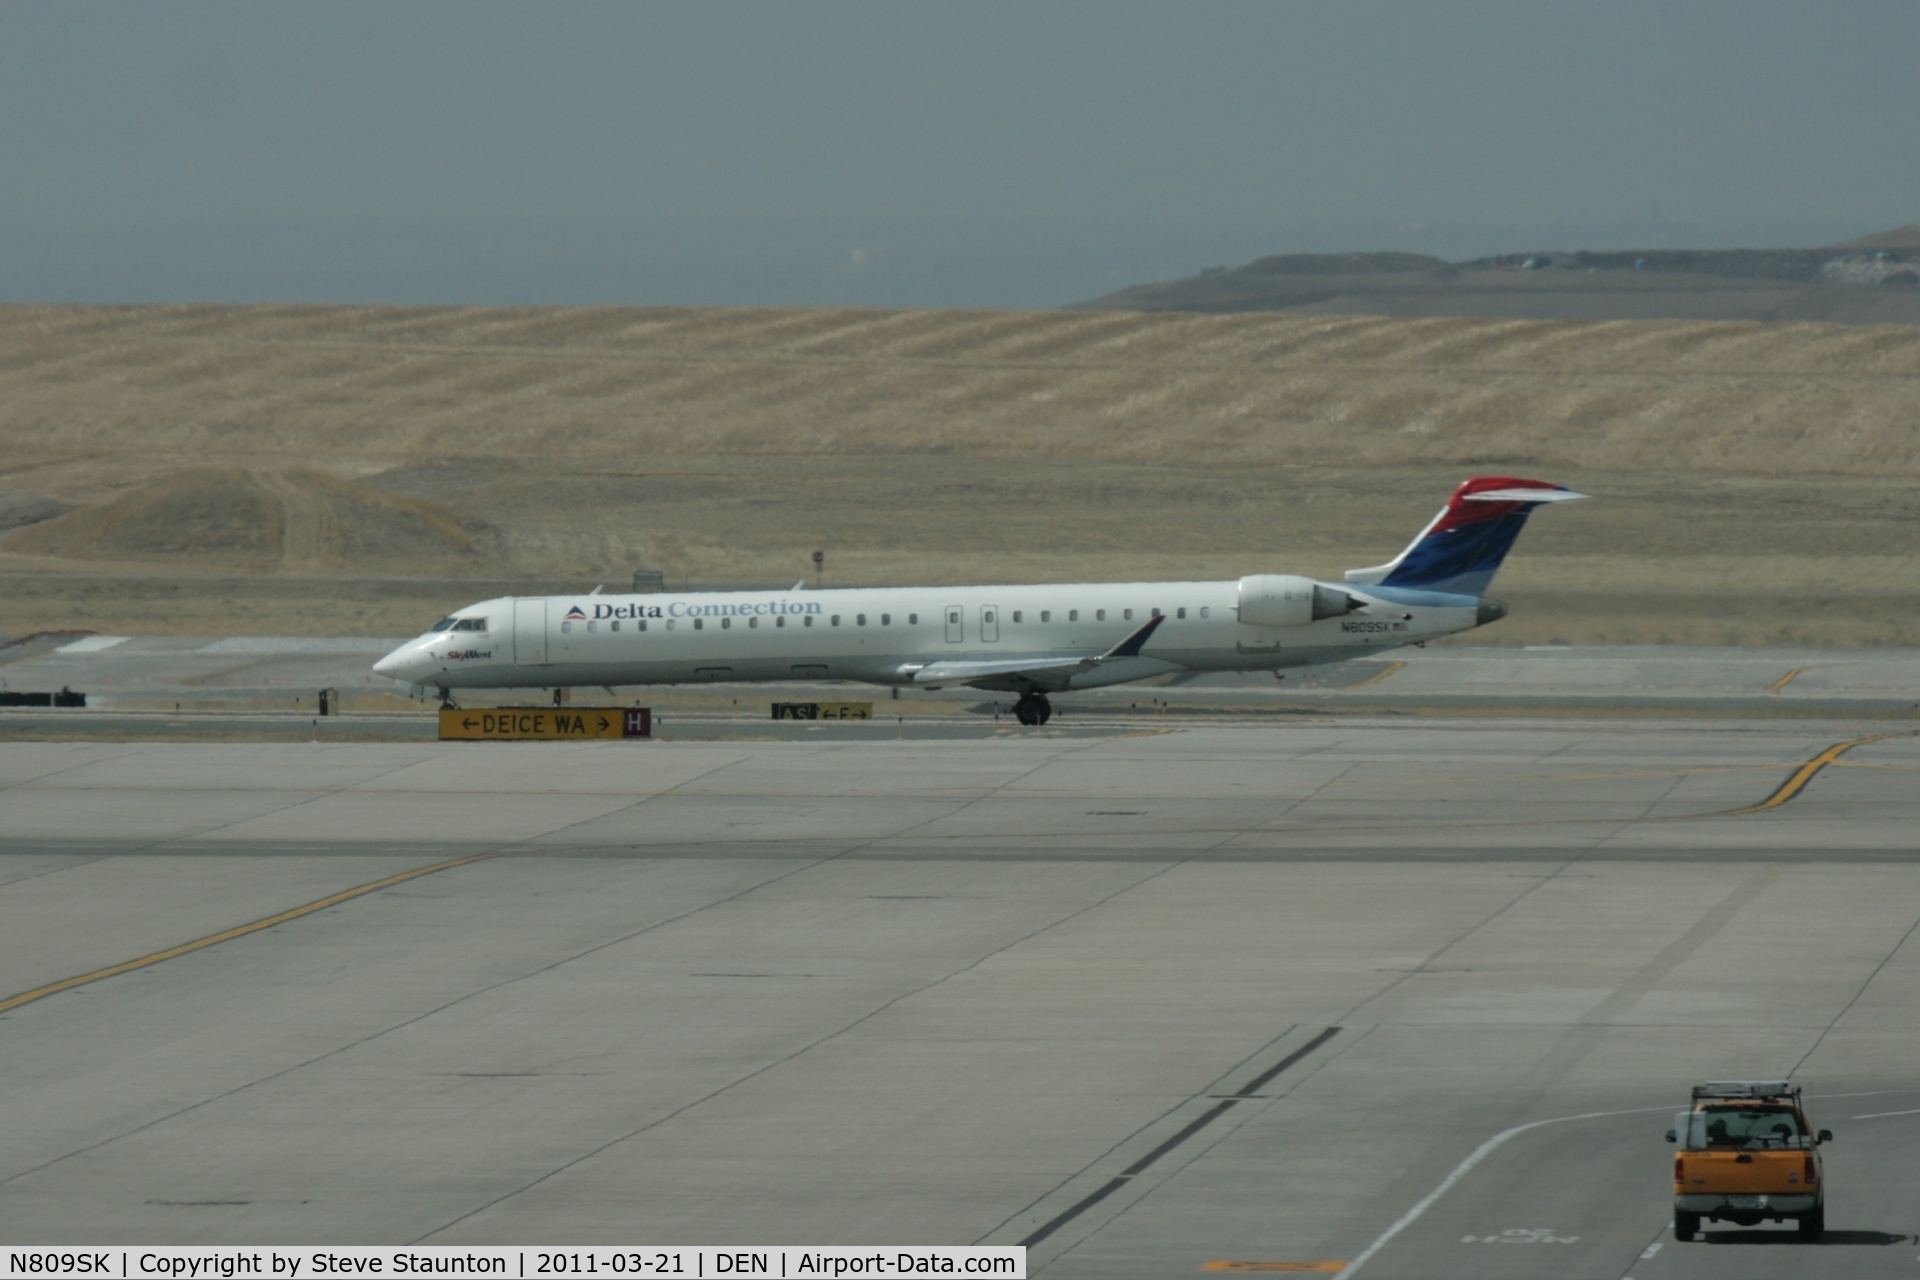 N809SK, 2006 Bombardier CRJ-900ER (CL-600-2D24) C/N 15086, Taken at Denver International Airport, in March 2011 whilst on an Aeroprint Aviation tour